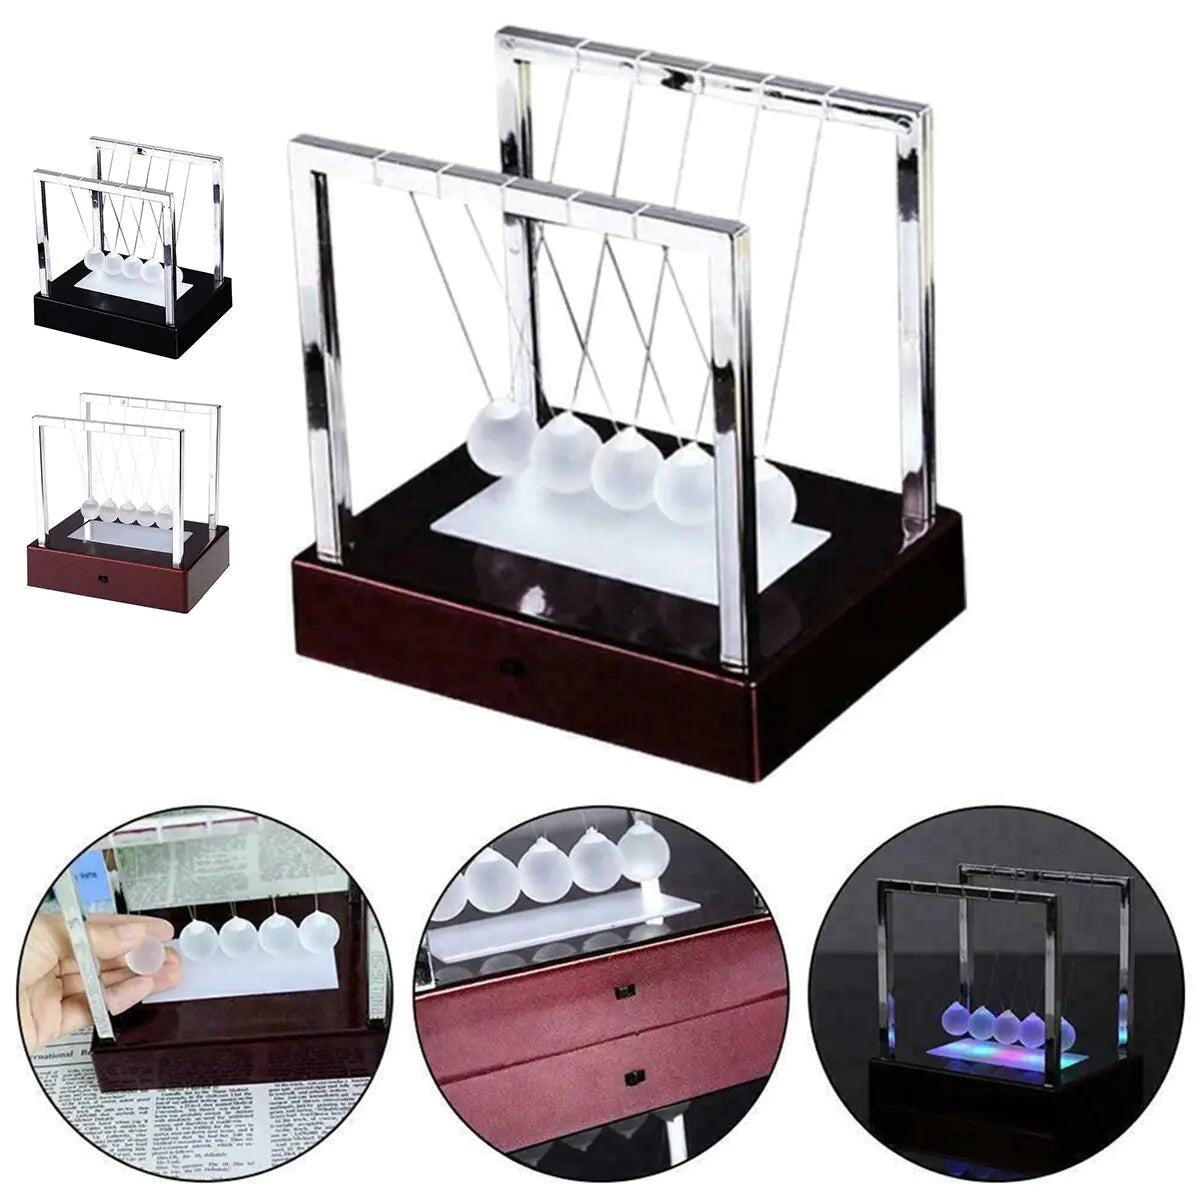 a model of a newton's cradle with four balls